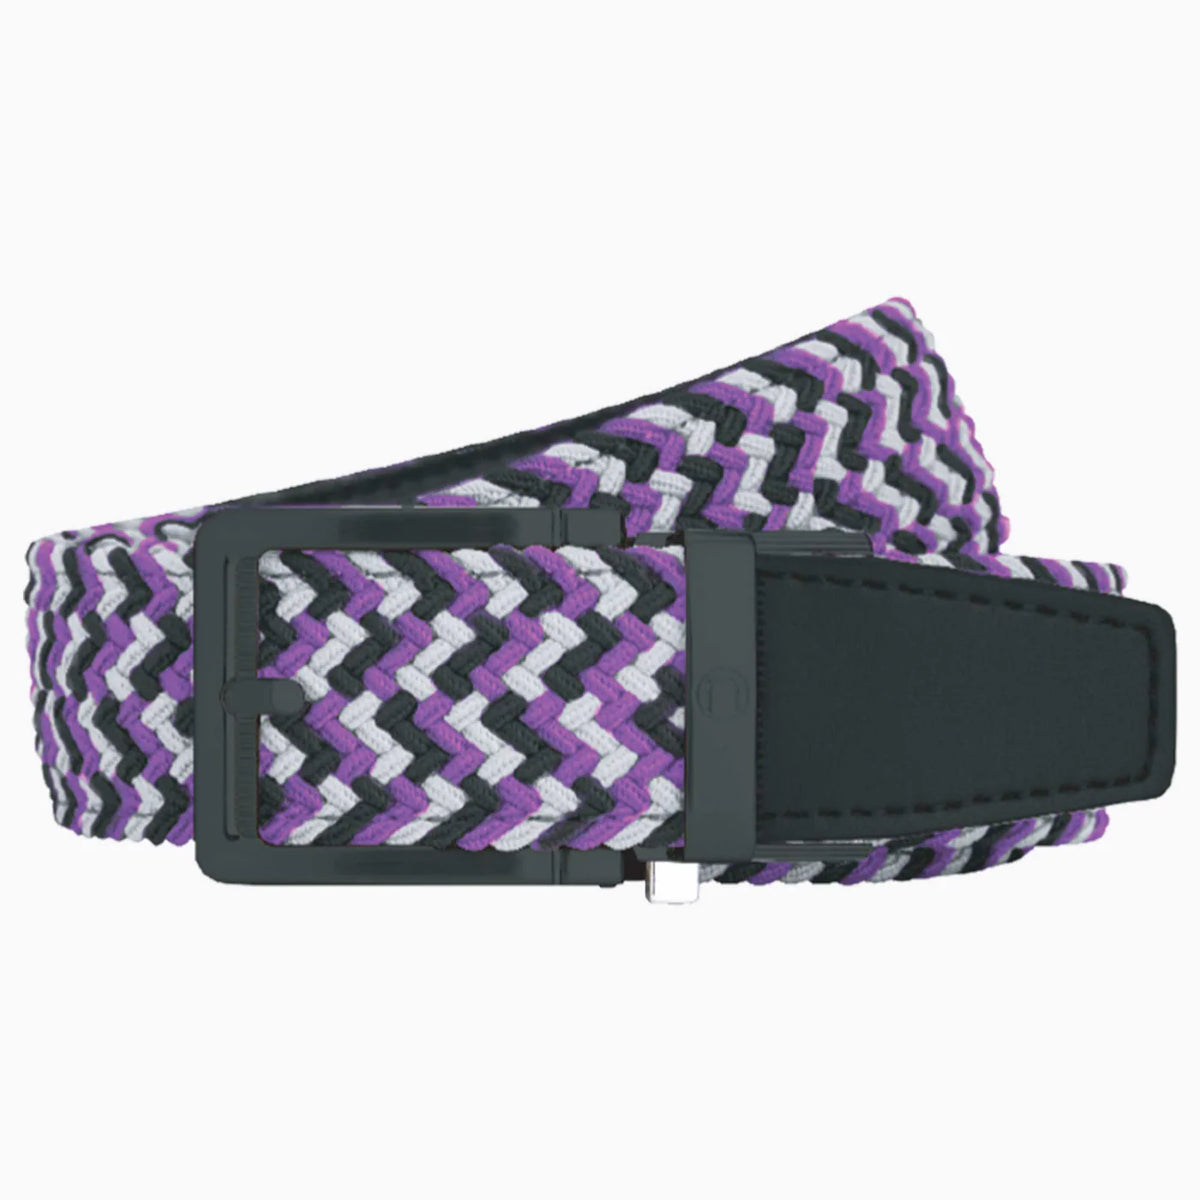 Men's Belts - Many Colors and Styles to Choose From